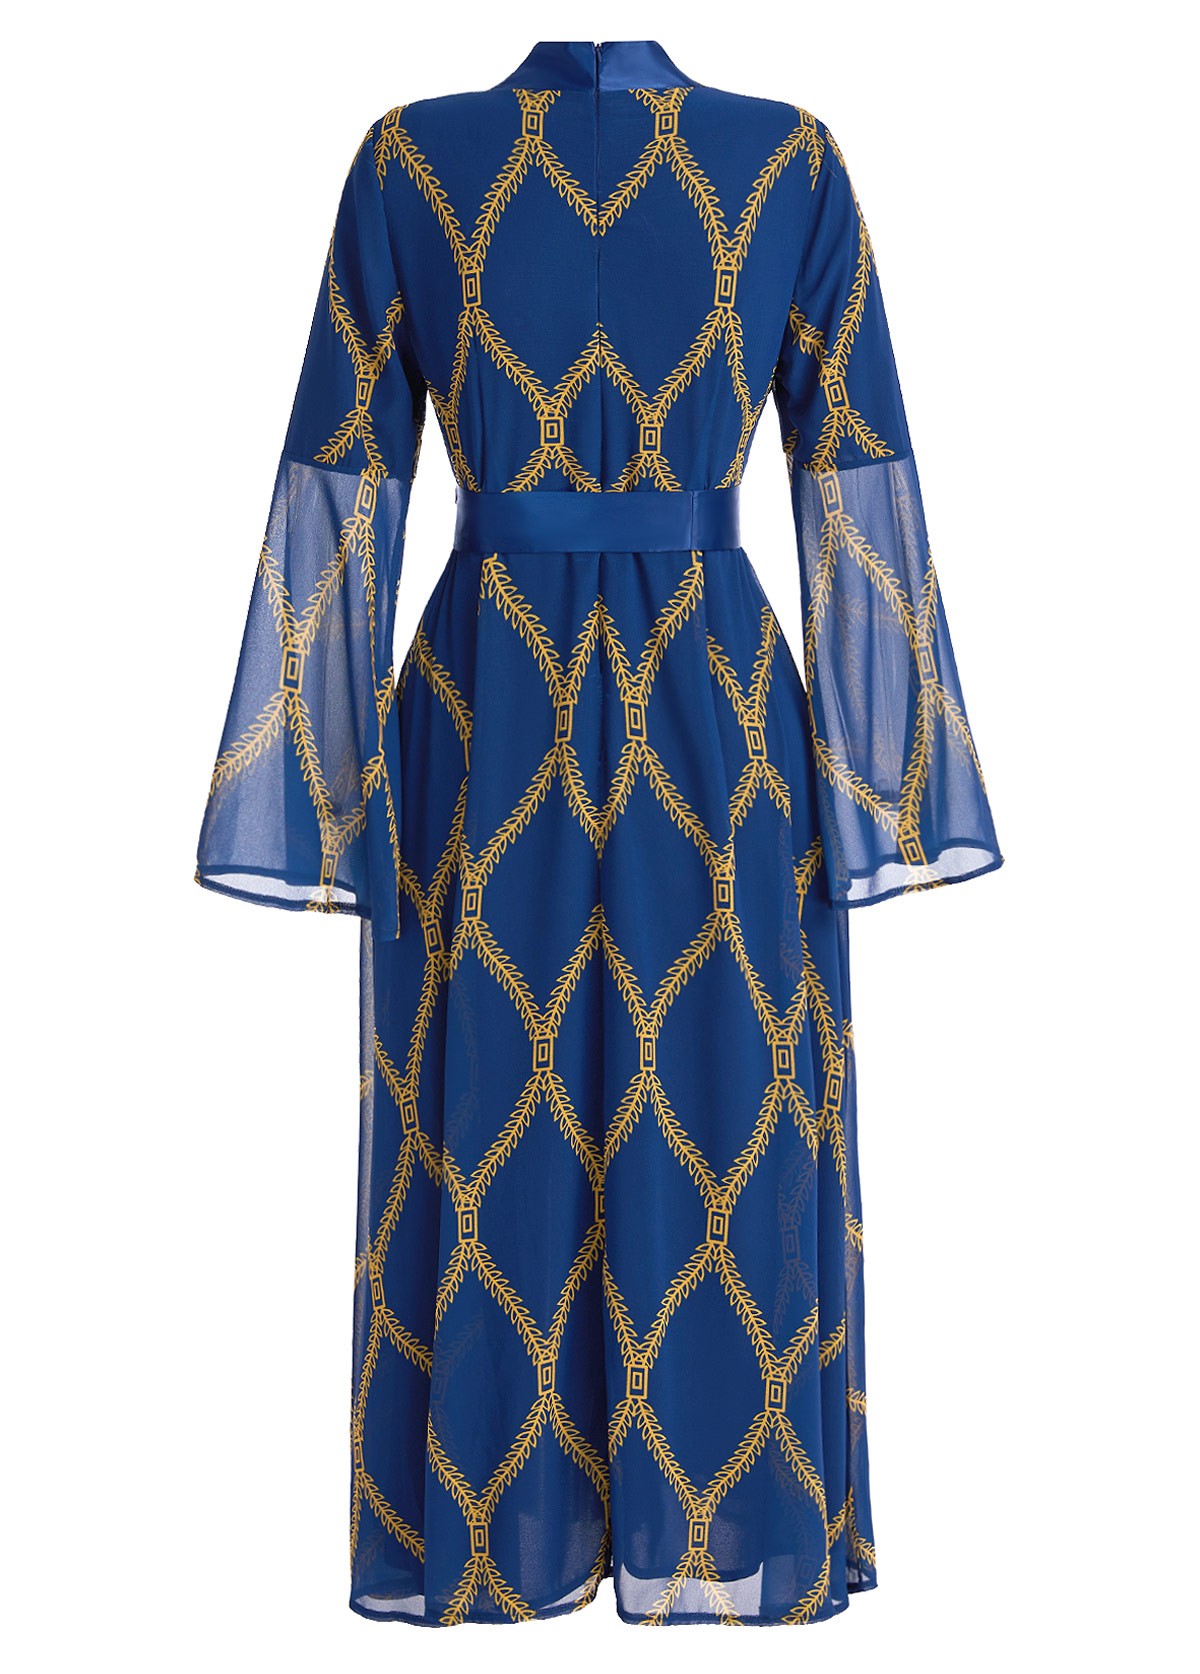 Tribal Print Patchwork Belted Navy New Year Dress